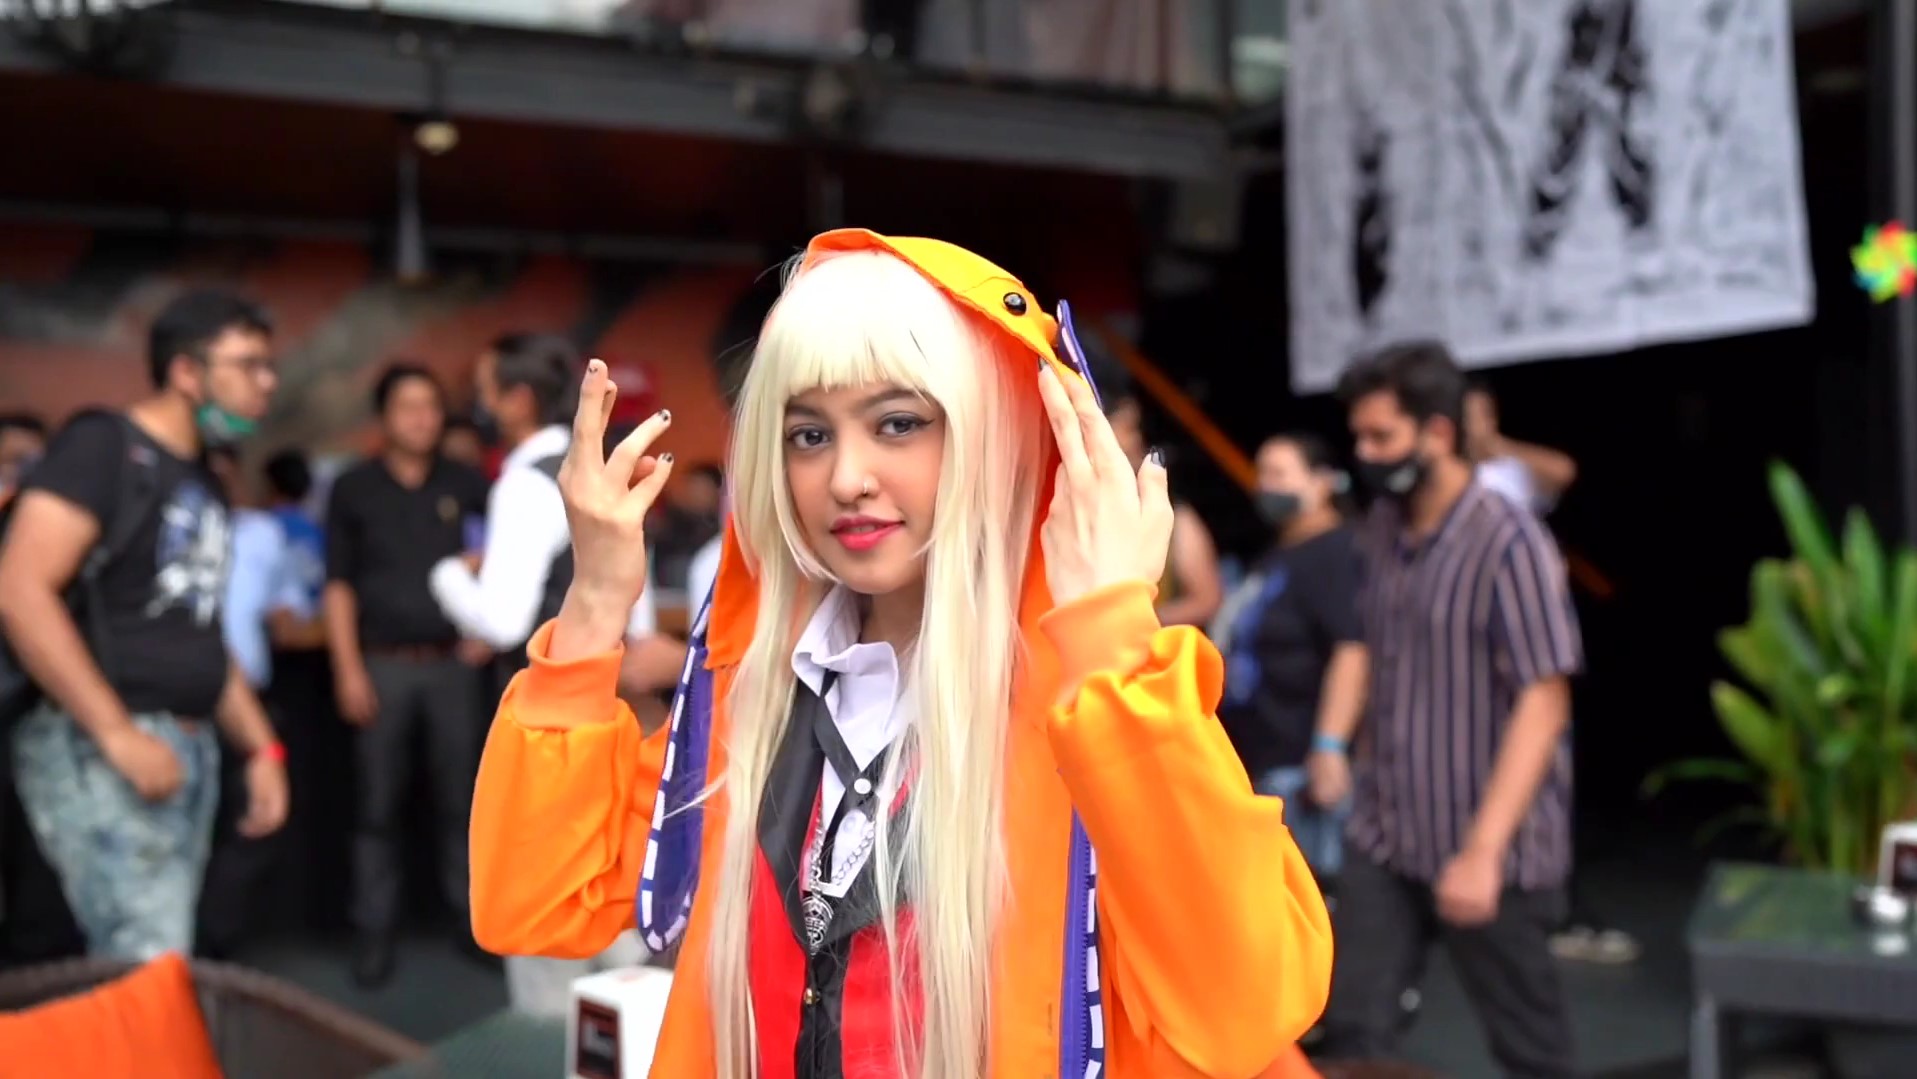 Cosplayer in India